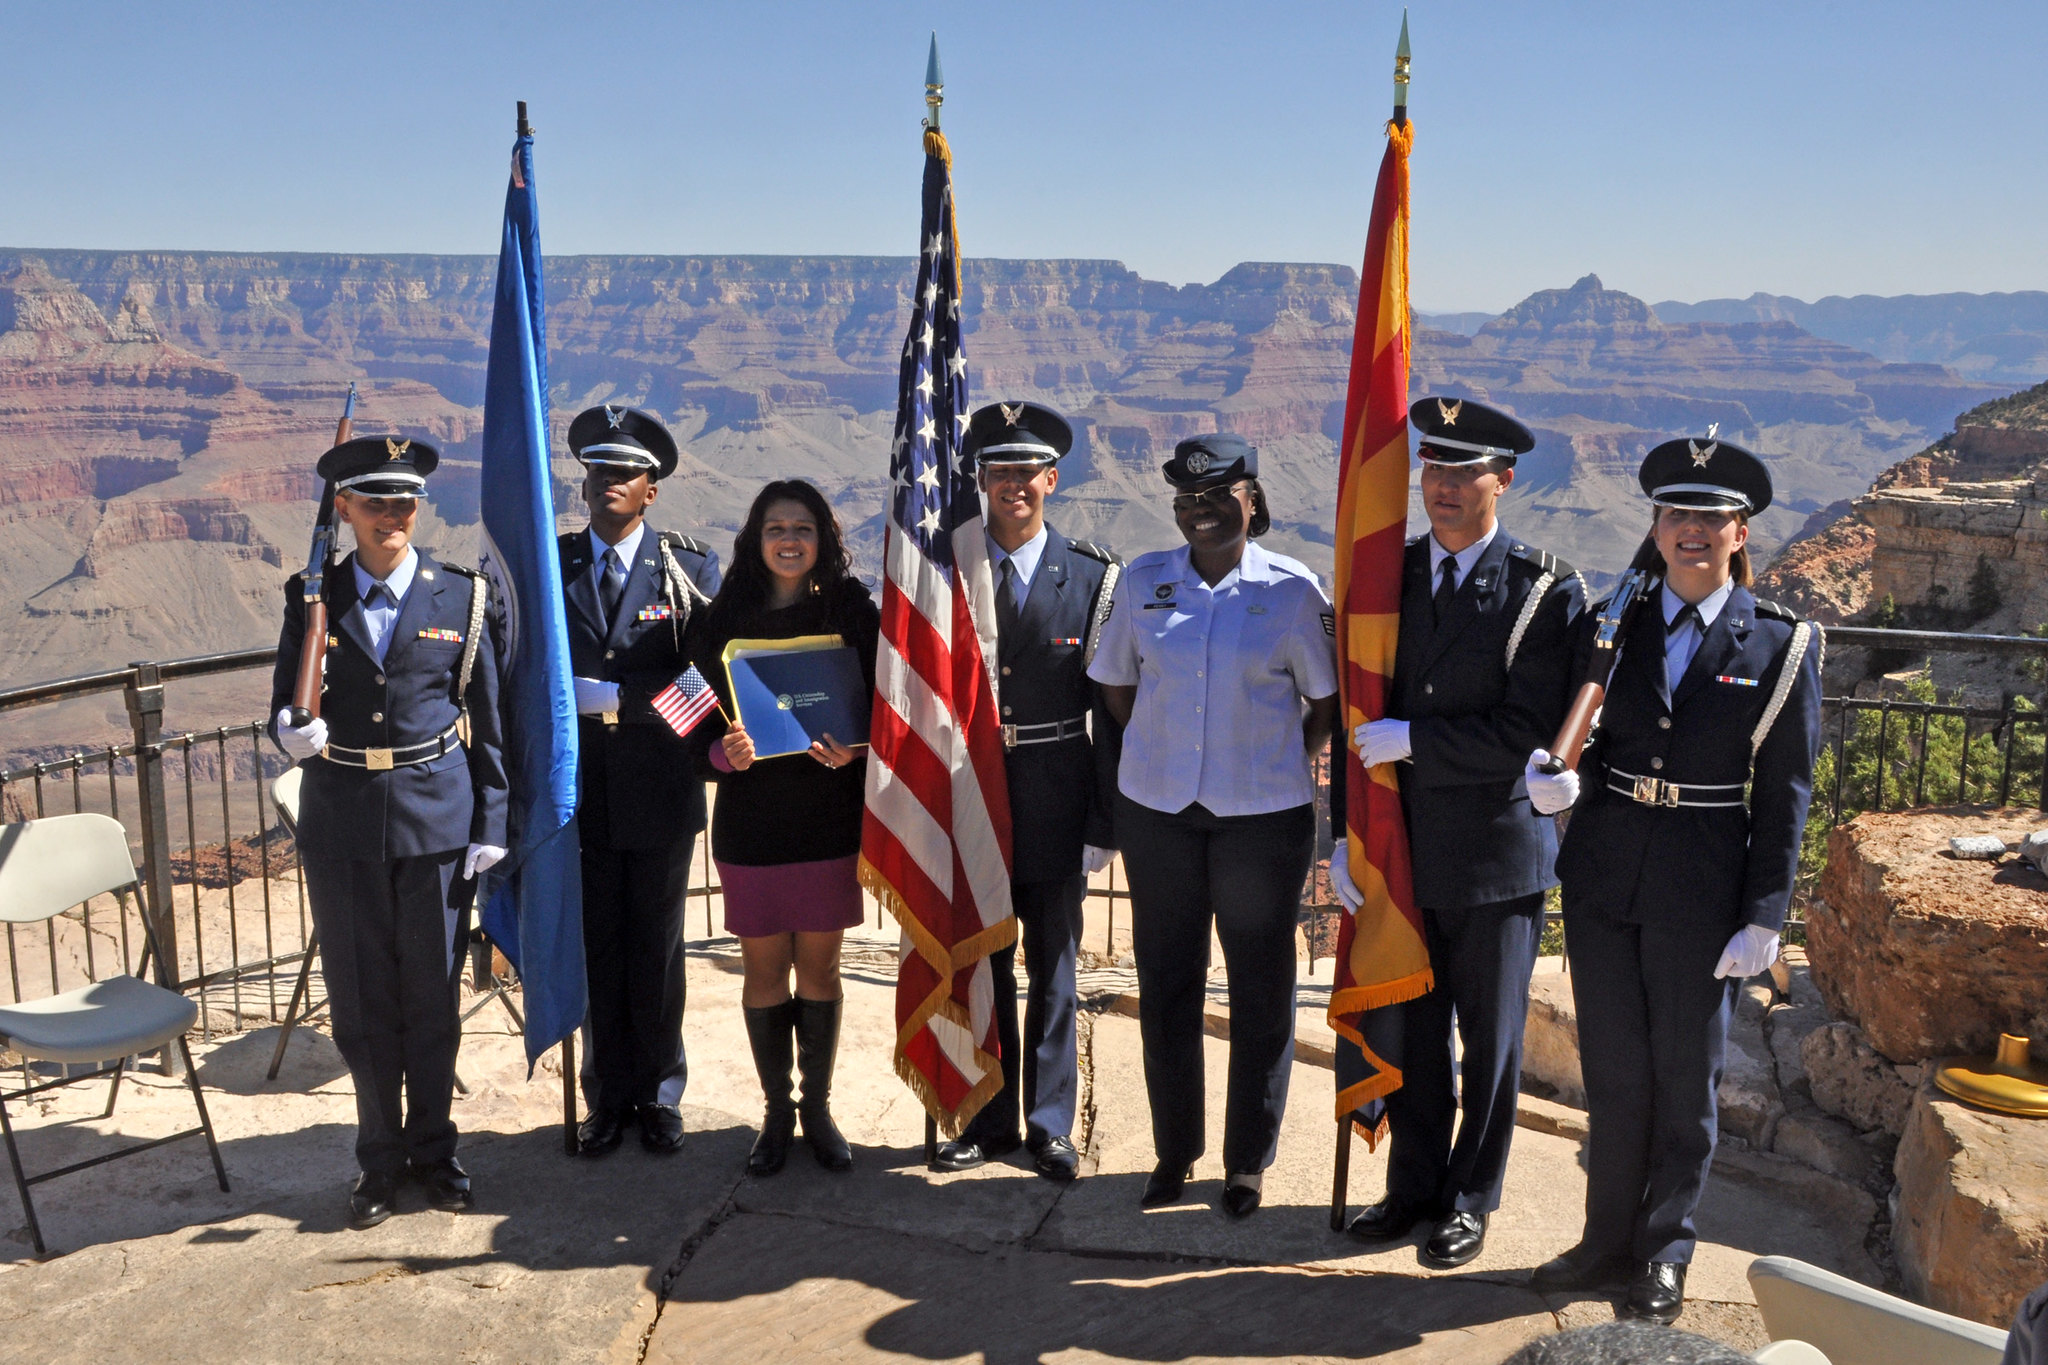 The Air Force ROTC Honor Guard of Northern Arizona University poses with a new citizen at the Grand Canyon National Park. Image by Grand Canyon National Park, via Flickr, CC BY 2.0.